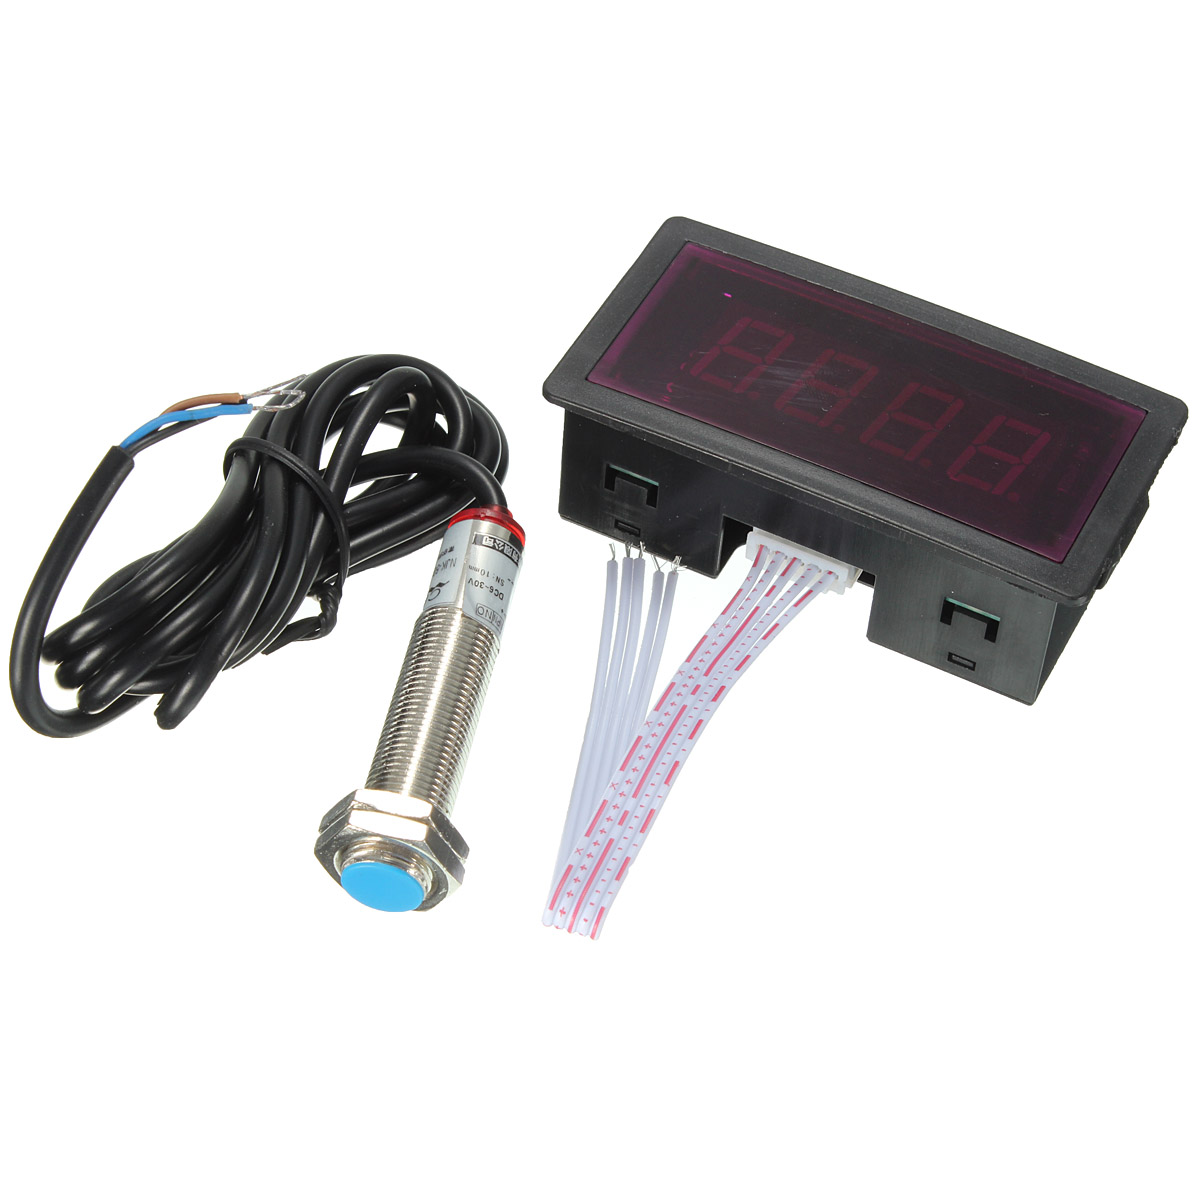 Red-LED-Tachometer-RPM-Speed-Meter-with-Proximity-Switch-Sensor-NPN-928692